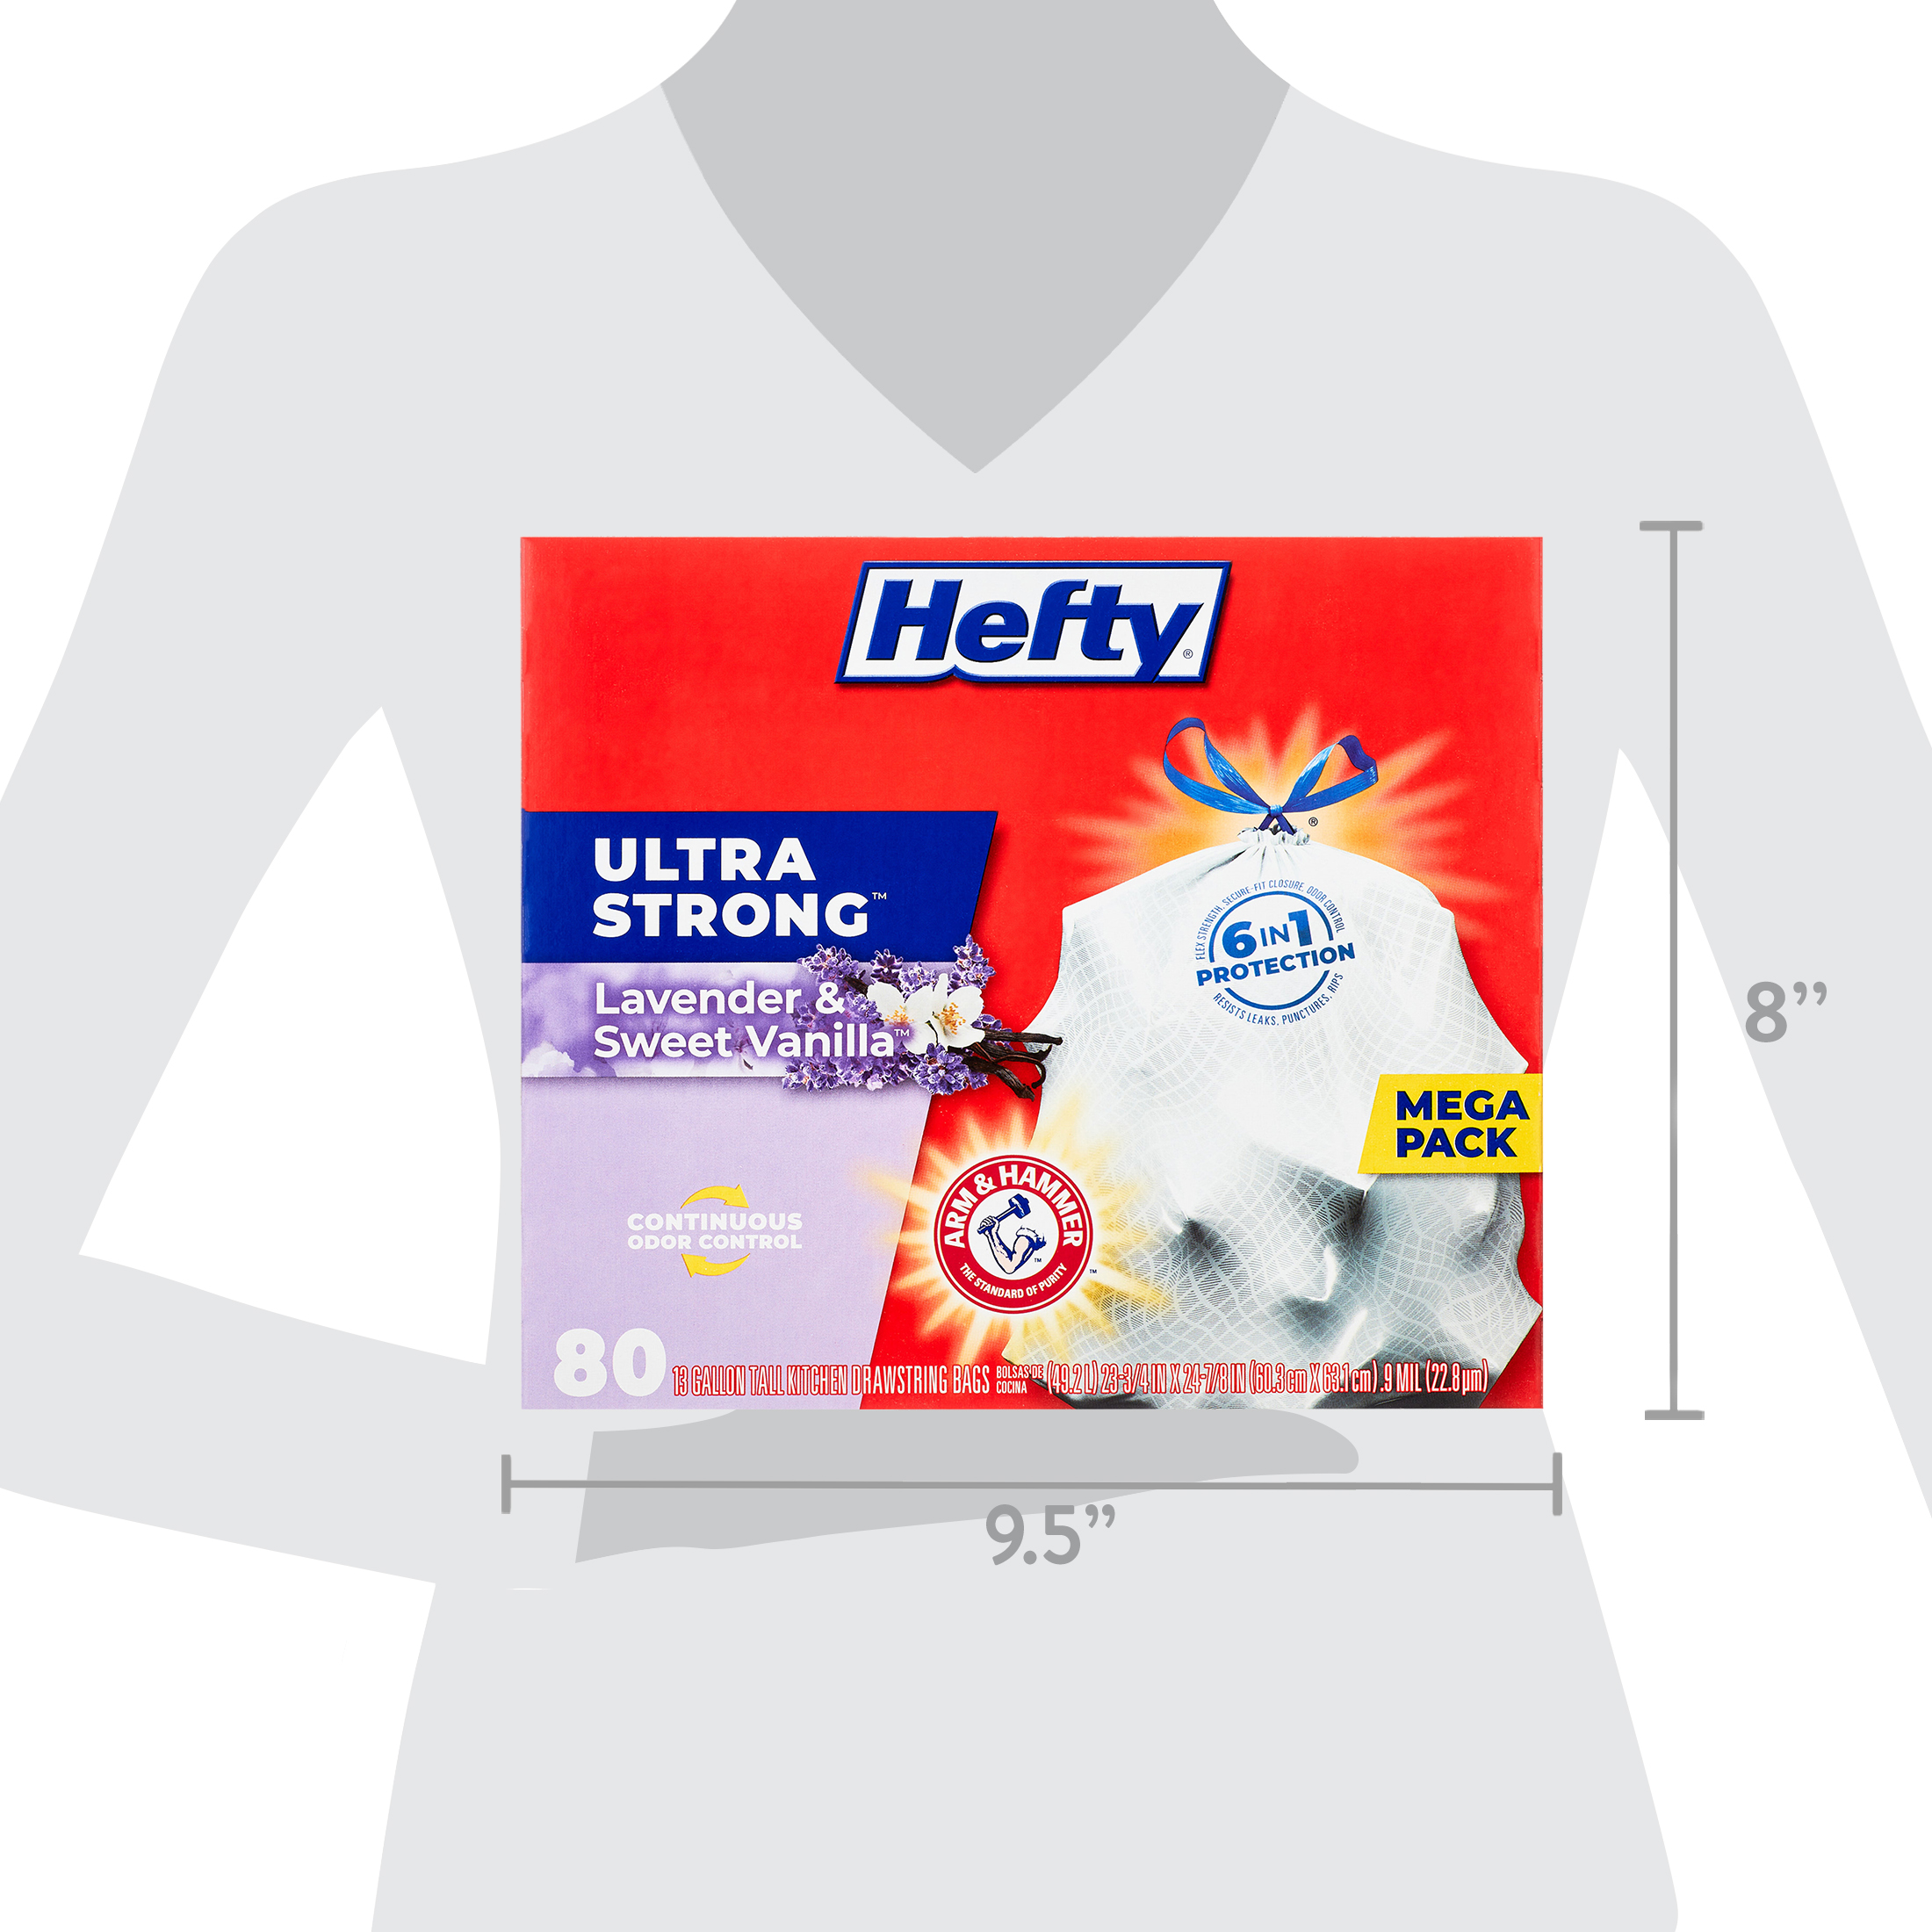 Hefty Ultra Strong Tall Kitchen Trash Bags, Lavender & Sweet Vanilla Scent, 13 Gallon, 80 Count - image 11 of 11